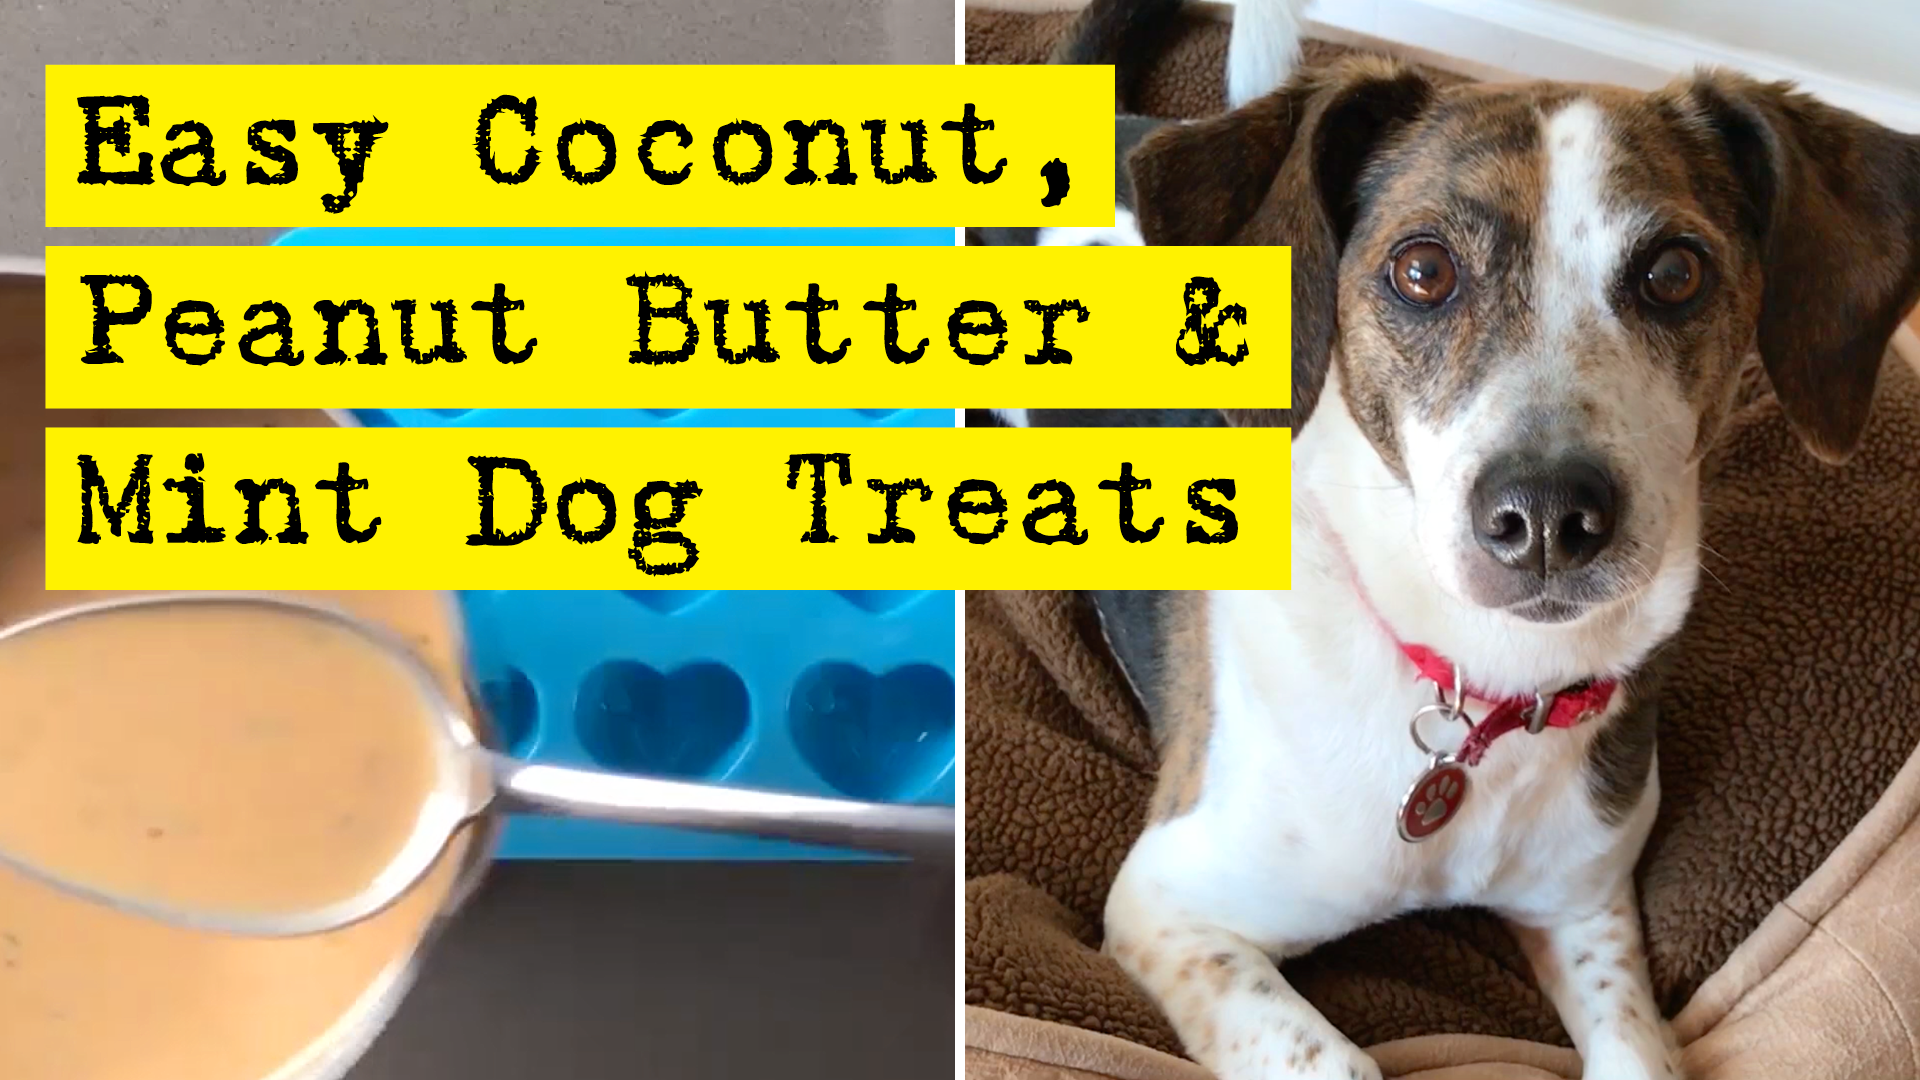 Easy Coconut Peanut Butter And Mint Dog Treats by DIY Presto!